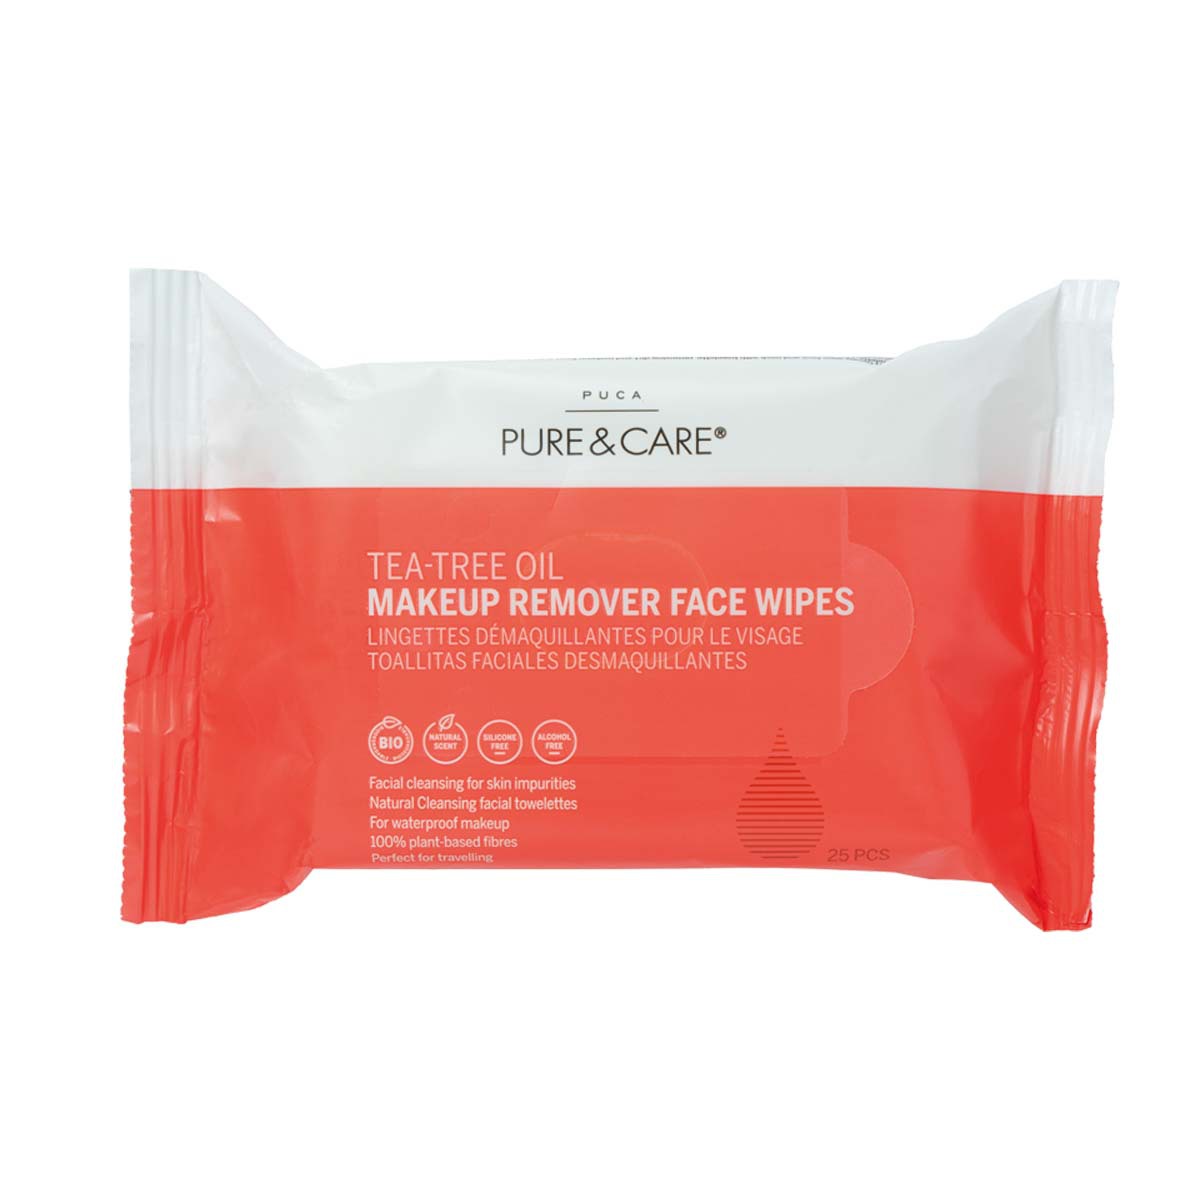 Tea Tree Oil Makeup Cleansing Wipes | PUCA - PURE & CARE